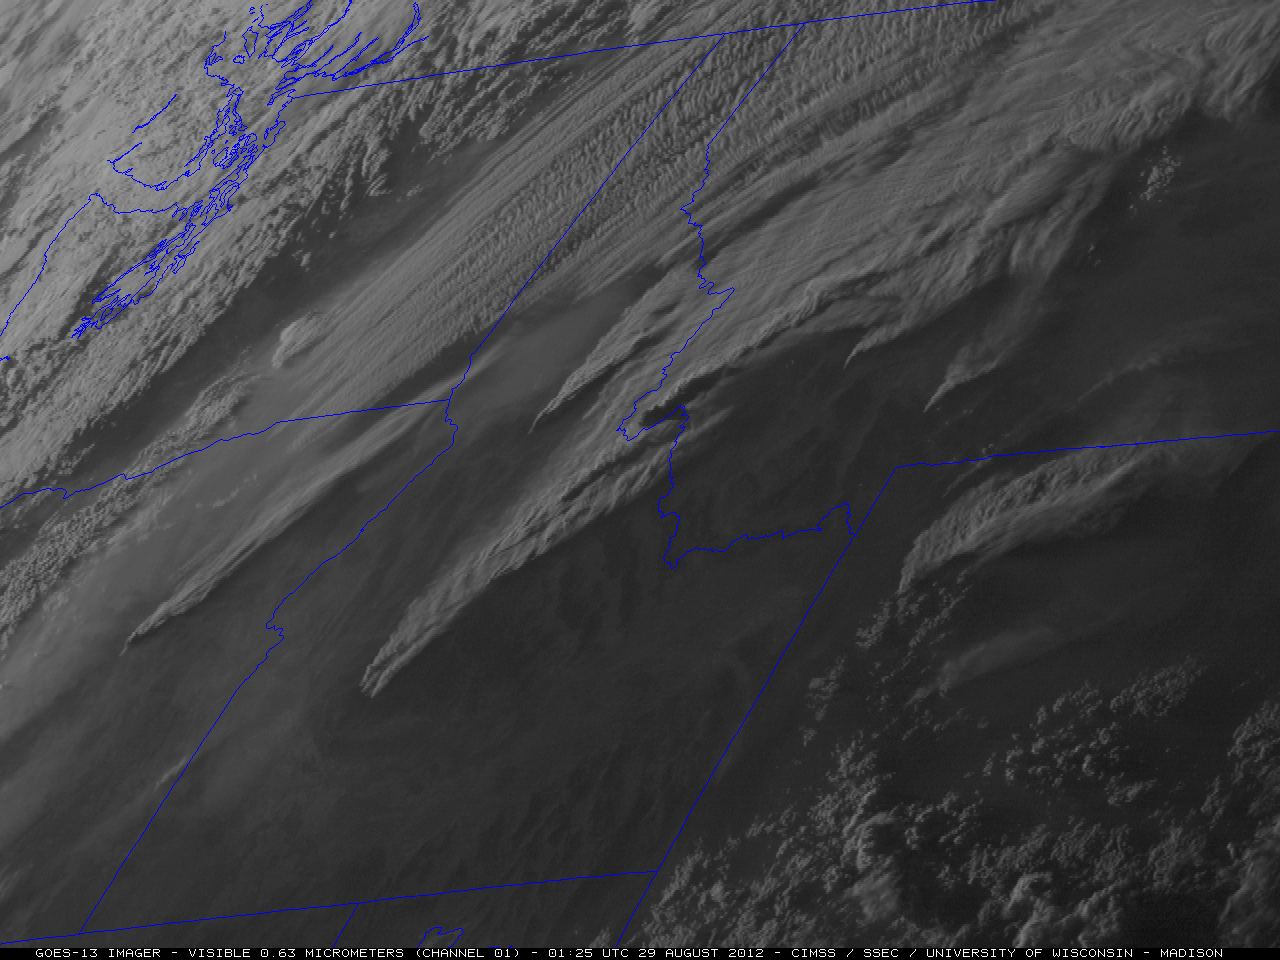 GOES-13 0.63 Âµm visible channel + 3.9 Âµm shortwave IR channel data (click image to play animation)